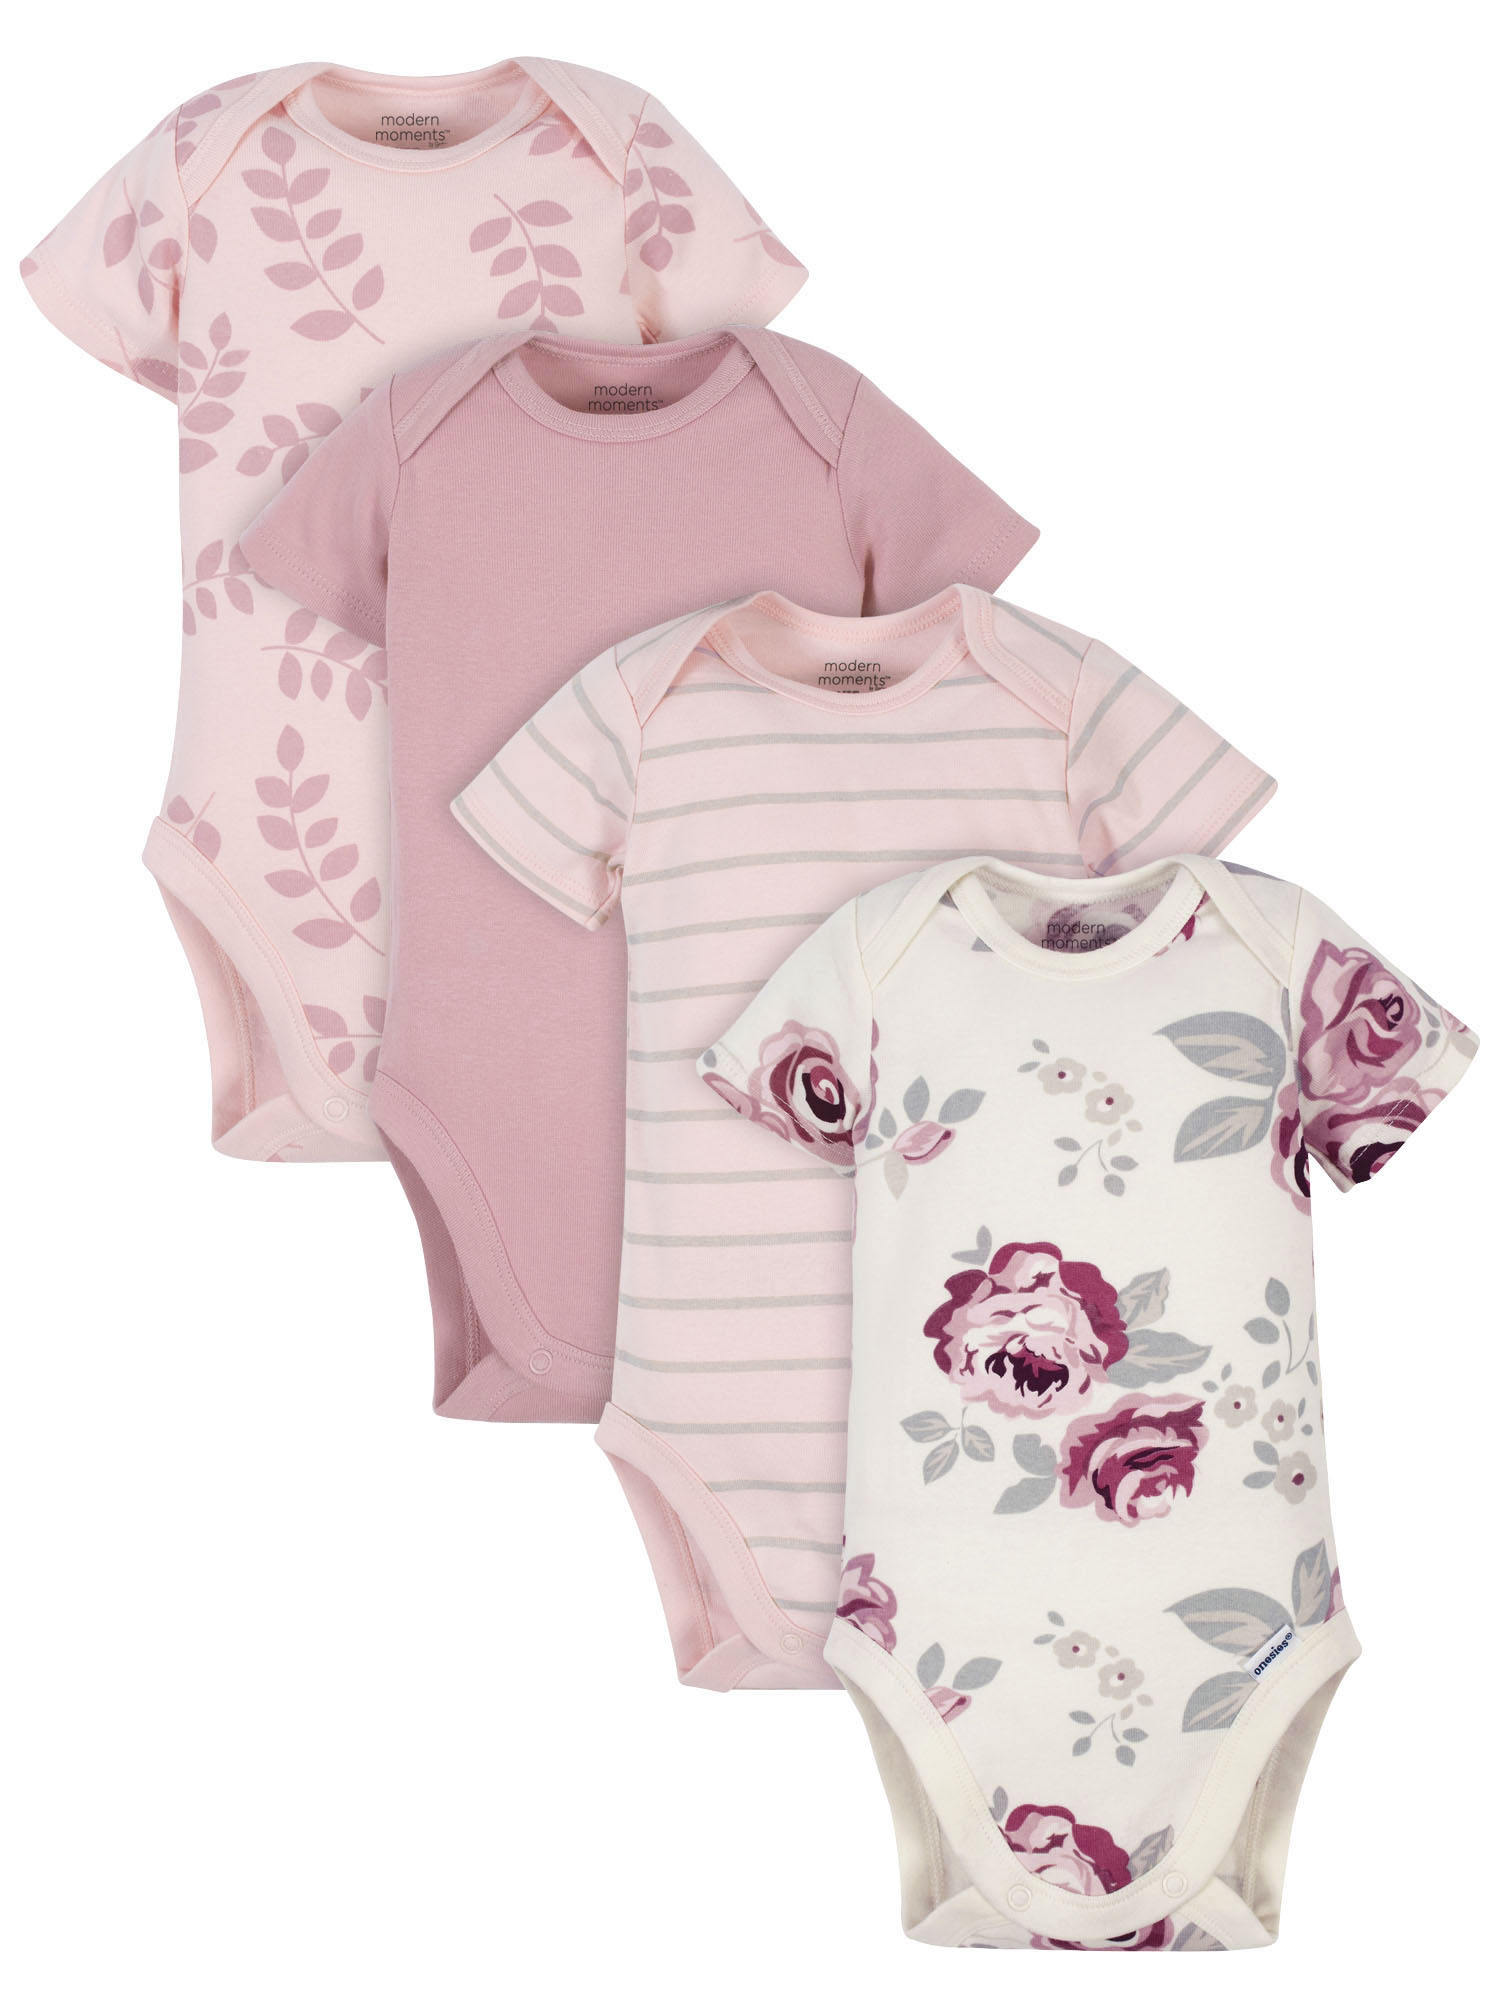 Modern Moments by Gerber Baby Girl Bodysuits, 4-Pack, Newborn-12 Months - image 1 of 8